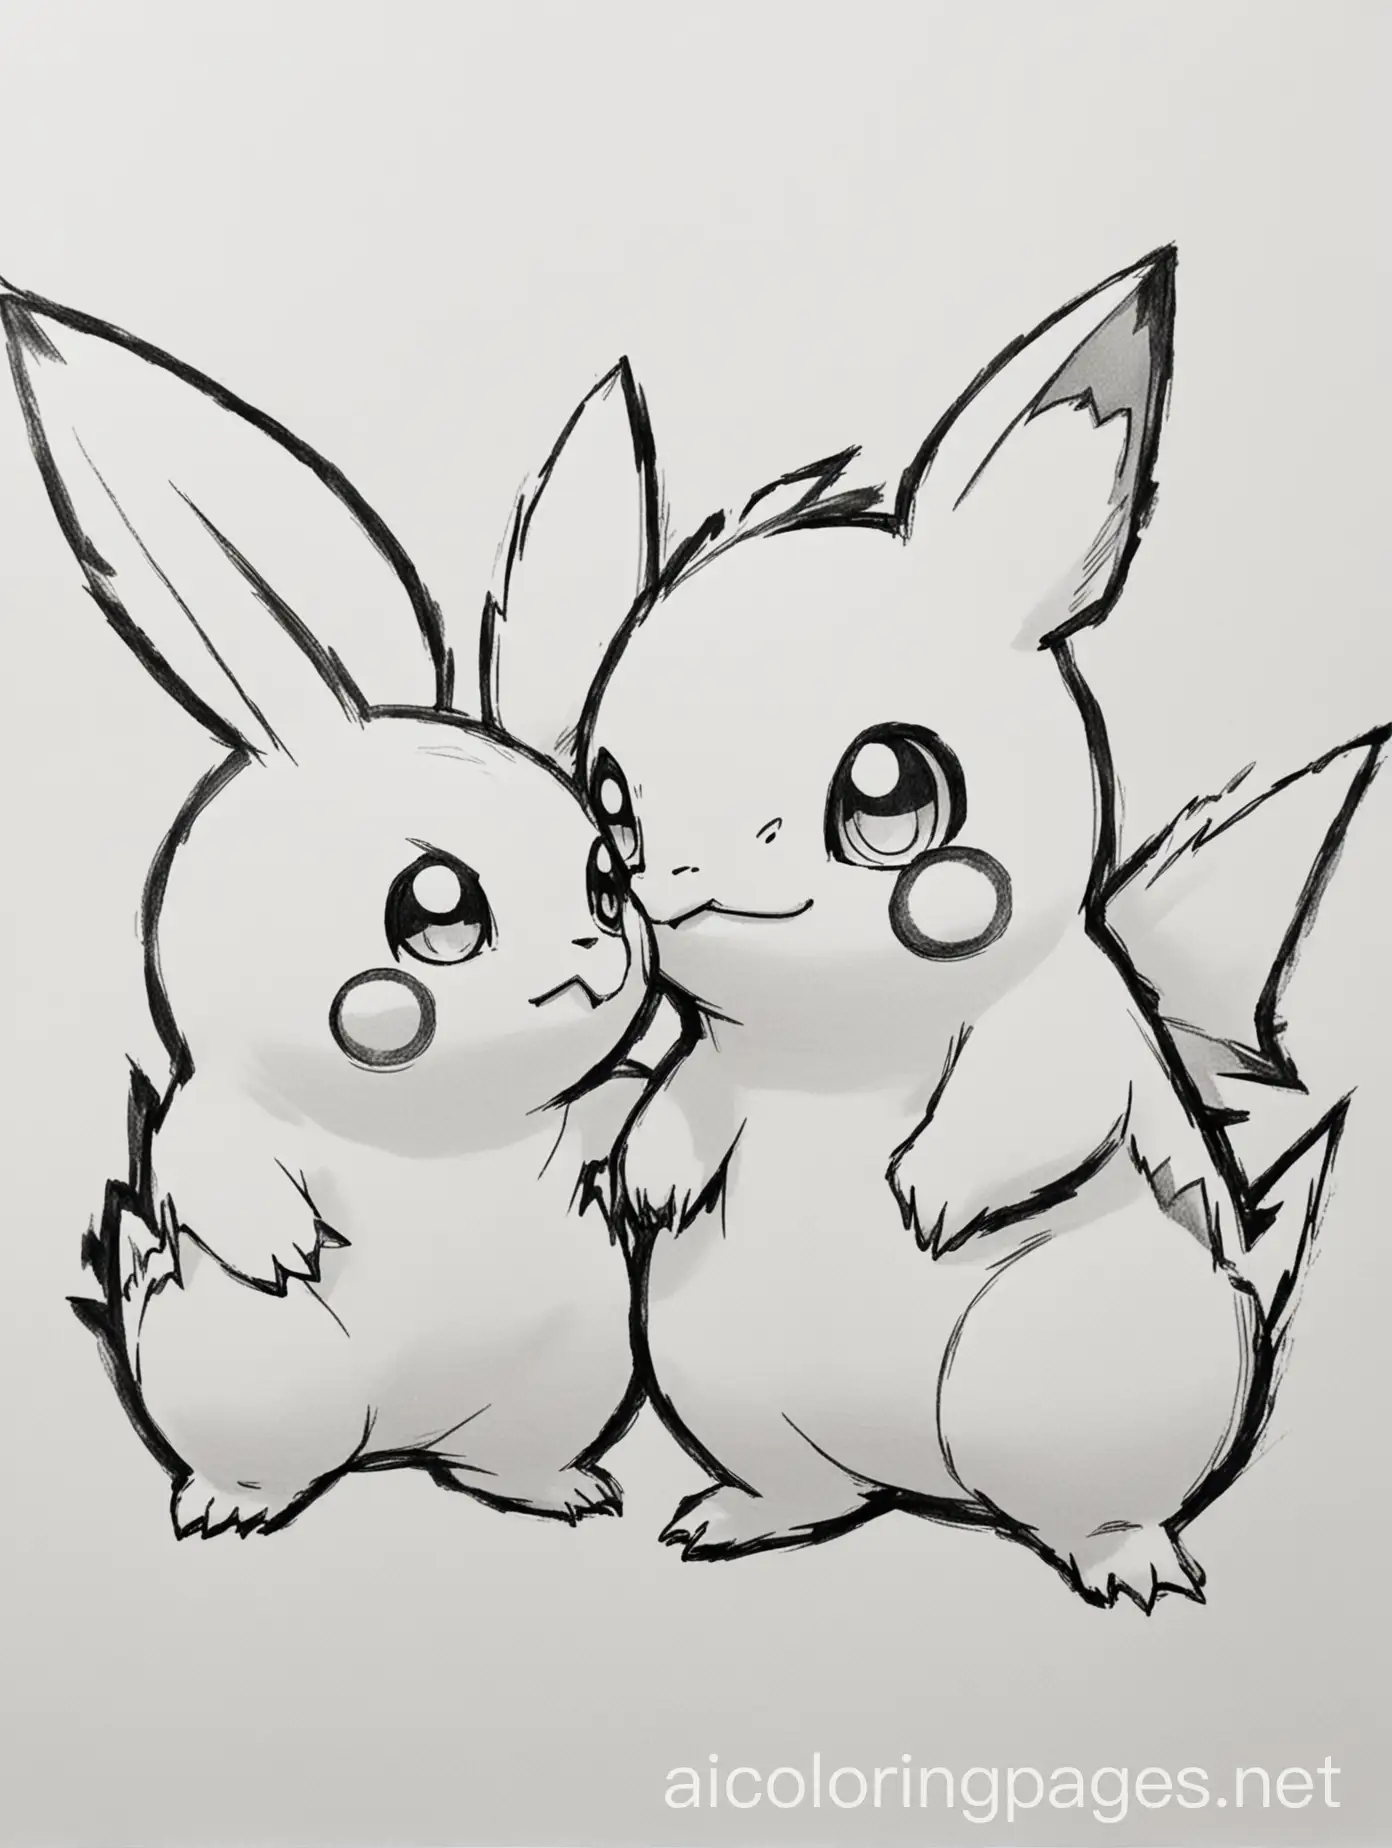 Two Pokémon. Very simple drawing. Thick lines, without much detail., Coloring Page, black and white, line art, white background, Simplicity, Ample White Space.